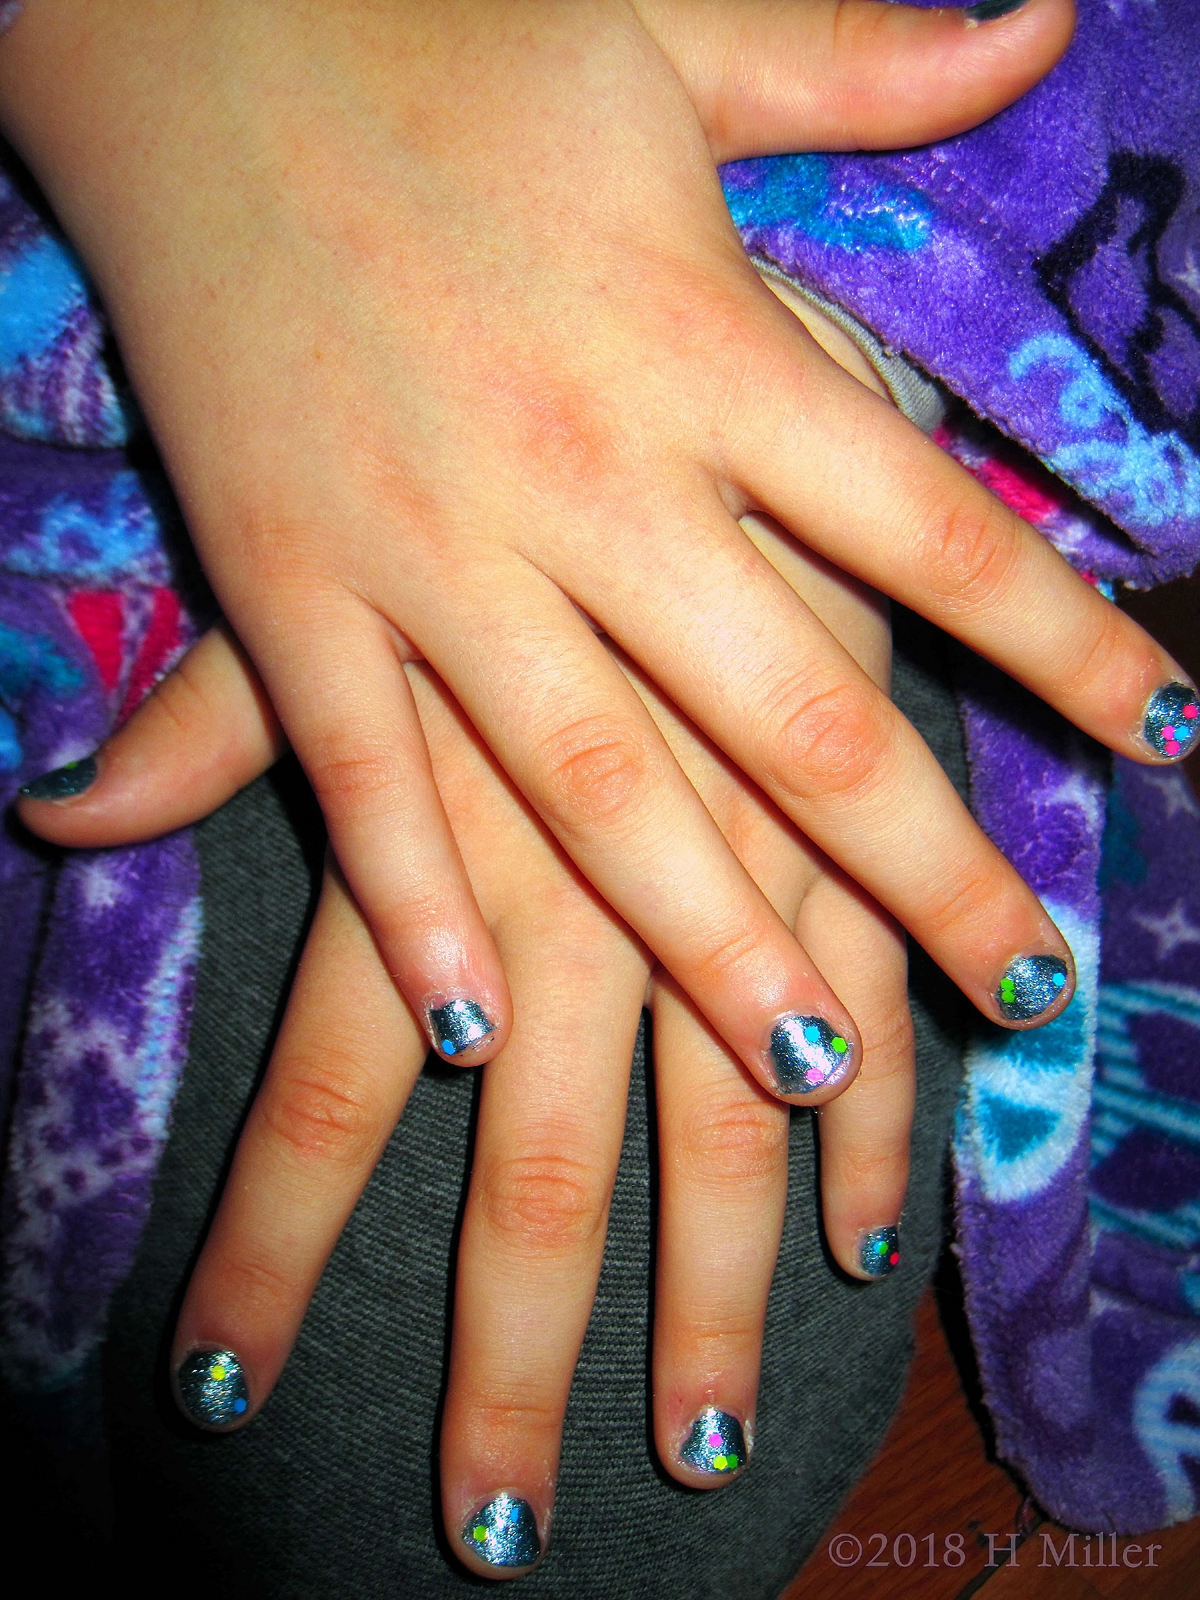 Shimmer Blue Girls Manicure With Colorful Polkadot Overlay 